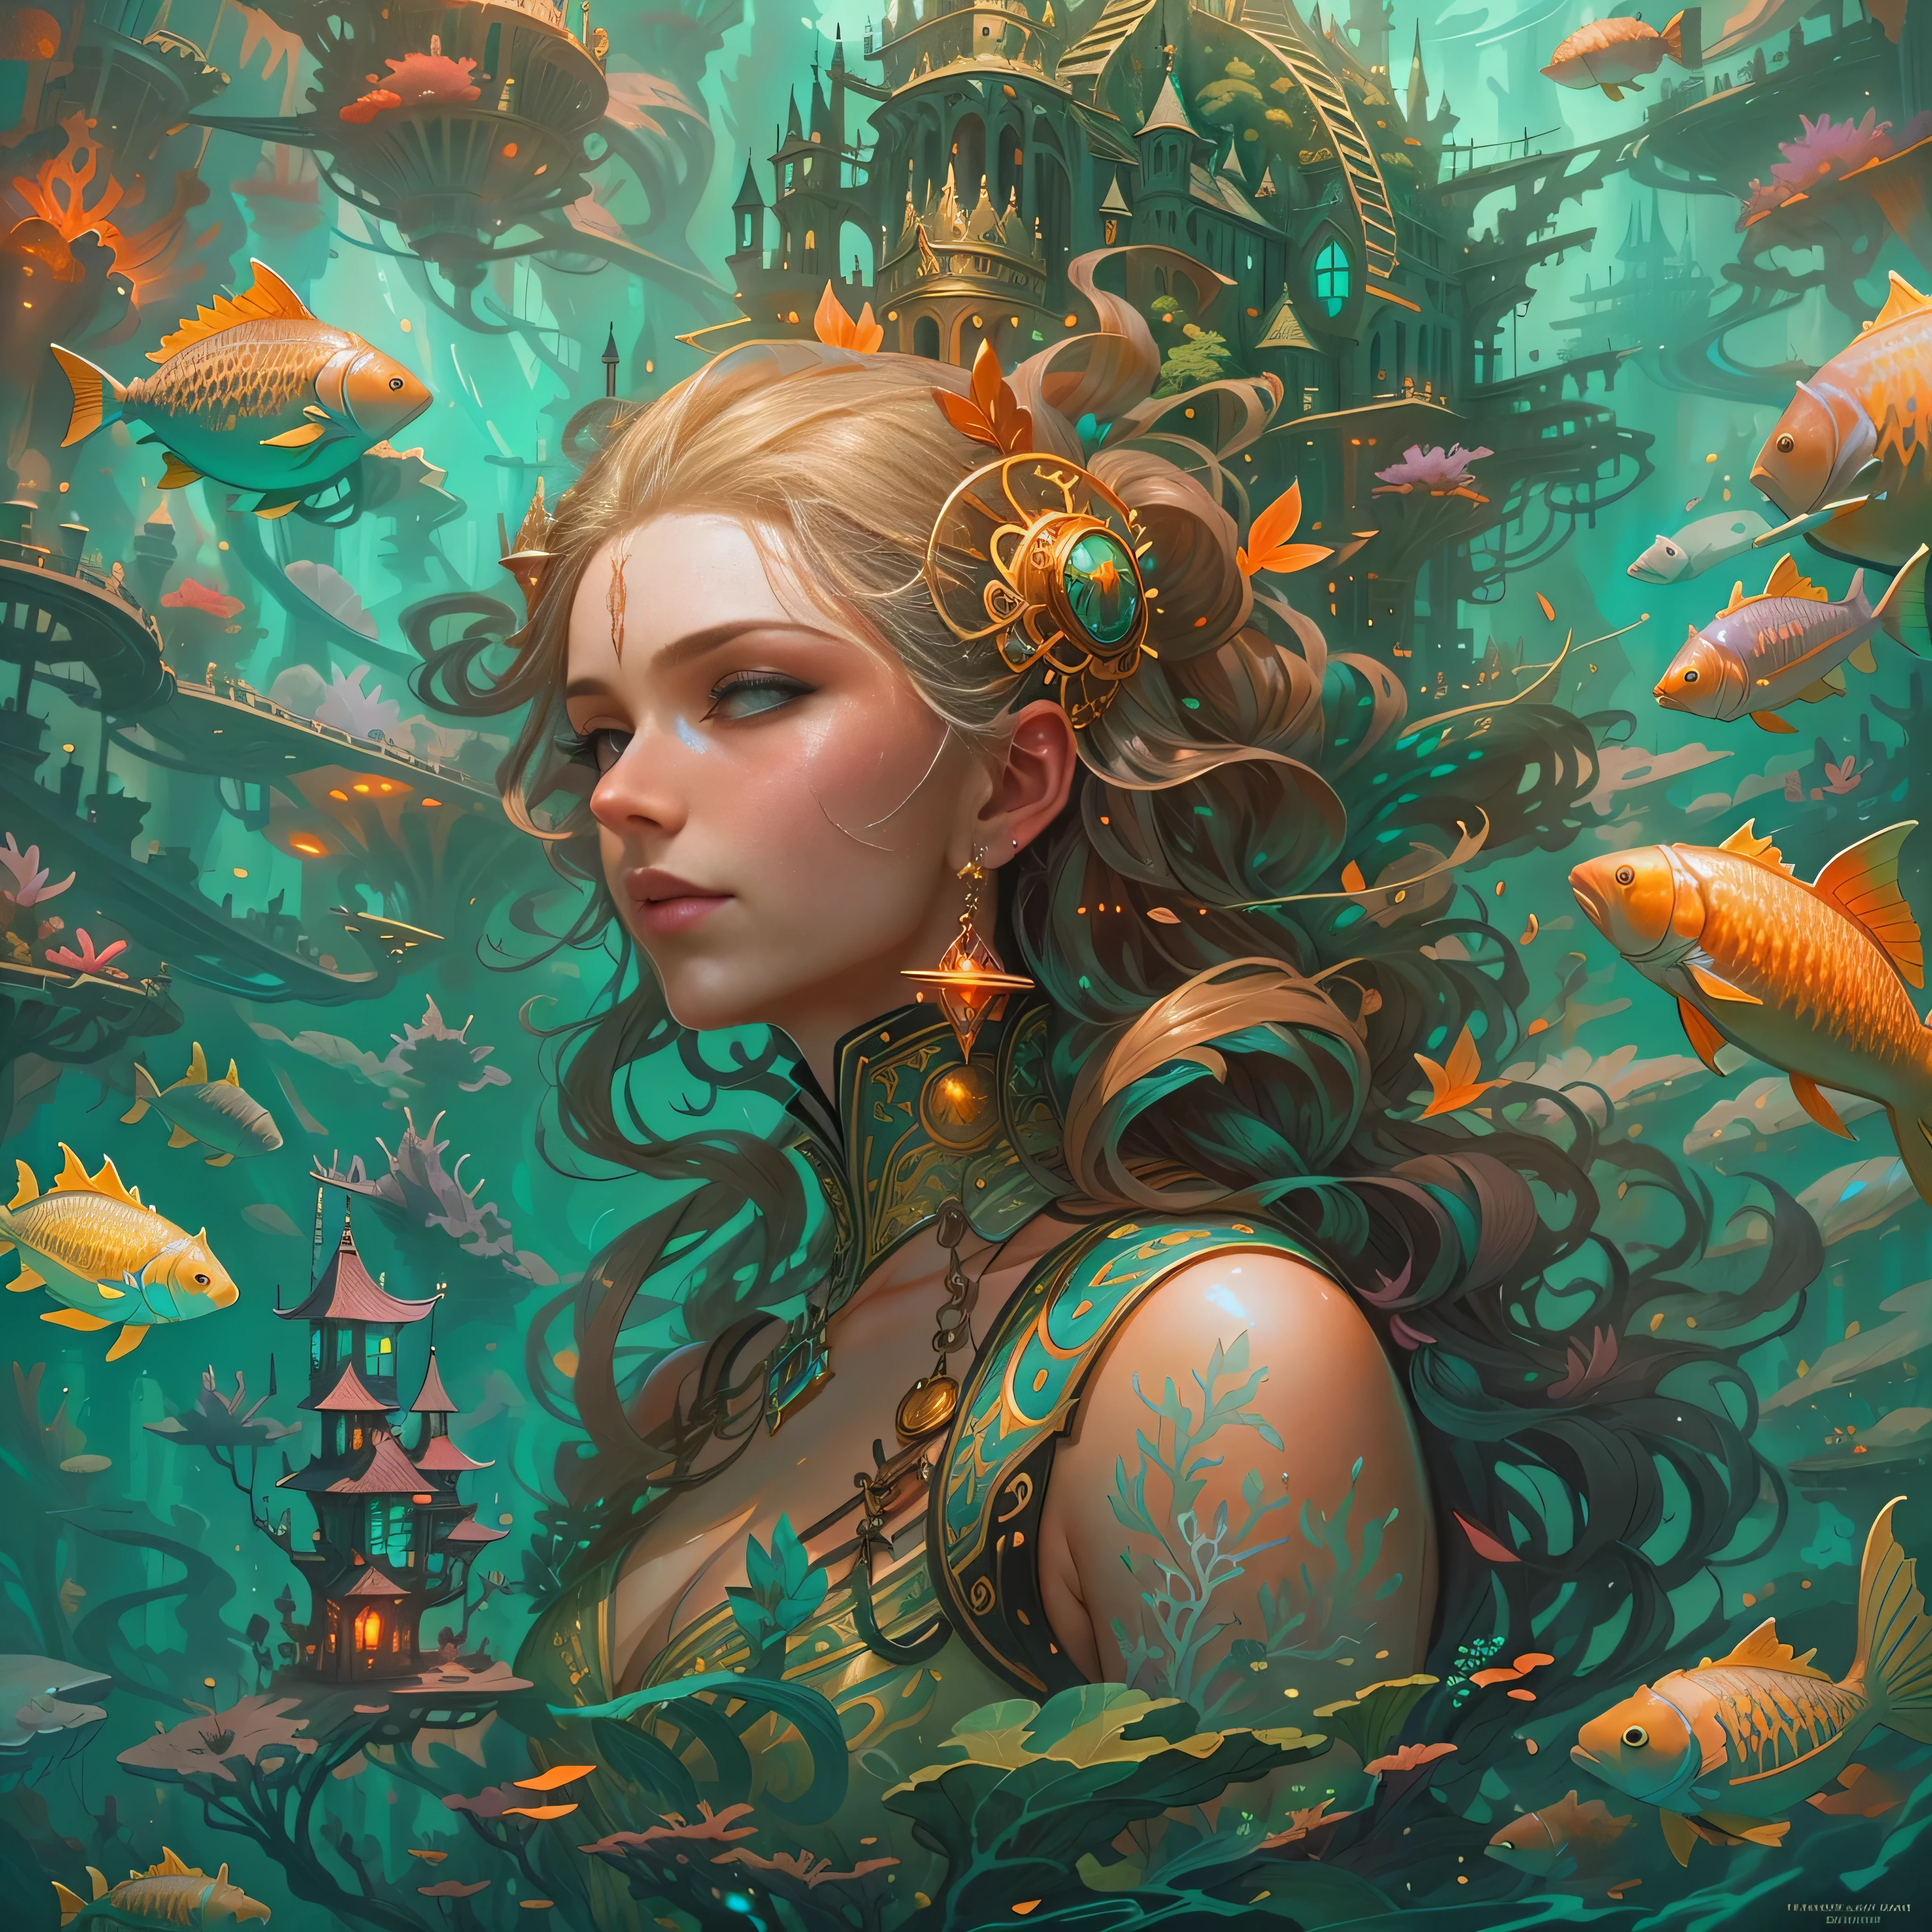 tmasterpiece，（（castle in distance：1.4，）），Fantastic underwater city。（Queen of mermaids under the sea，Golden hair，The coral reef is worn on his head，Beautiful bright eyes），surrounded with fishes, Lots of fish，Schools of fish swam towards her，the reef，airbubble，Underwater construction，dan mumford tom bagshaw, jen bartel, Fantasy art Behance, mohrbacher, Fantasy art style, Detailed fantasy illustration, A beautiful artwork illustration, fantasy art illustration, style of peter mohrbacher, peter mohrbacher''，Official artistic aesthetics，